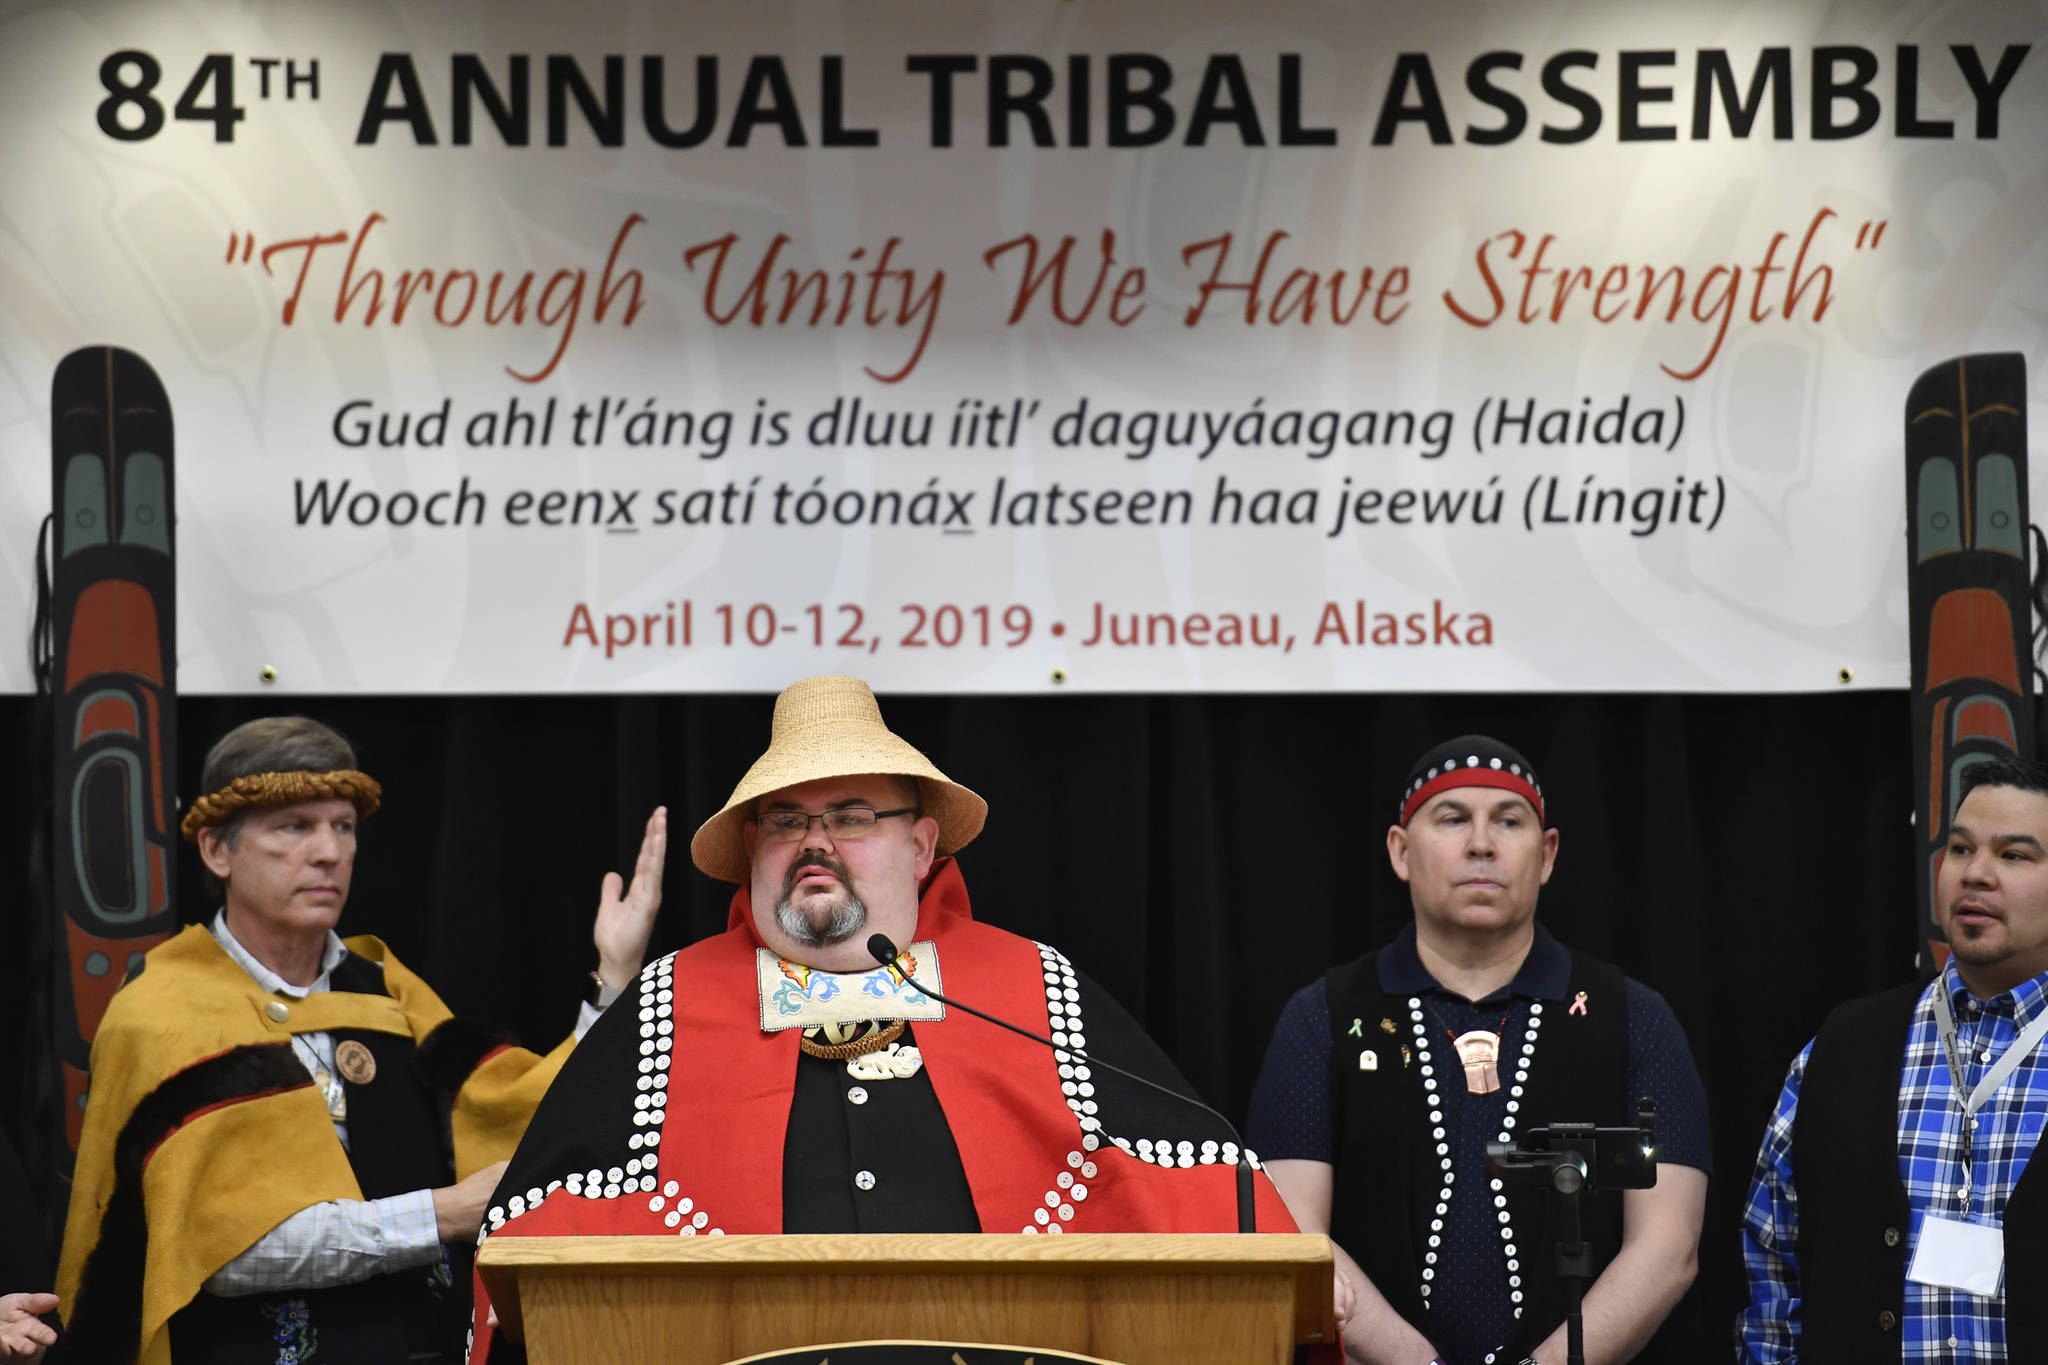 Richard Chalyee Éesh Peterson, president of the Central Council of Tingit and Haida Indian Tribes of Alaska, watches over the opening of the three-day 84th Annual Tribal Assembly at the Elizabeth Peratrovich Hall in April 2019. This year’s assembly is canceled. (Michael Penn | Juneau Empire File)